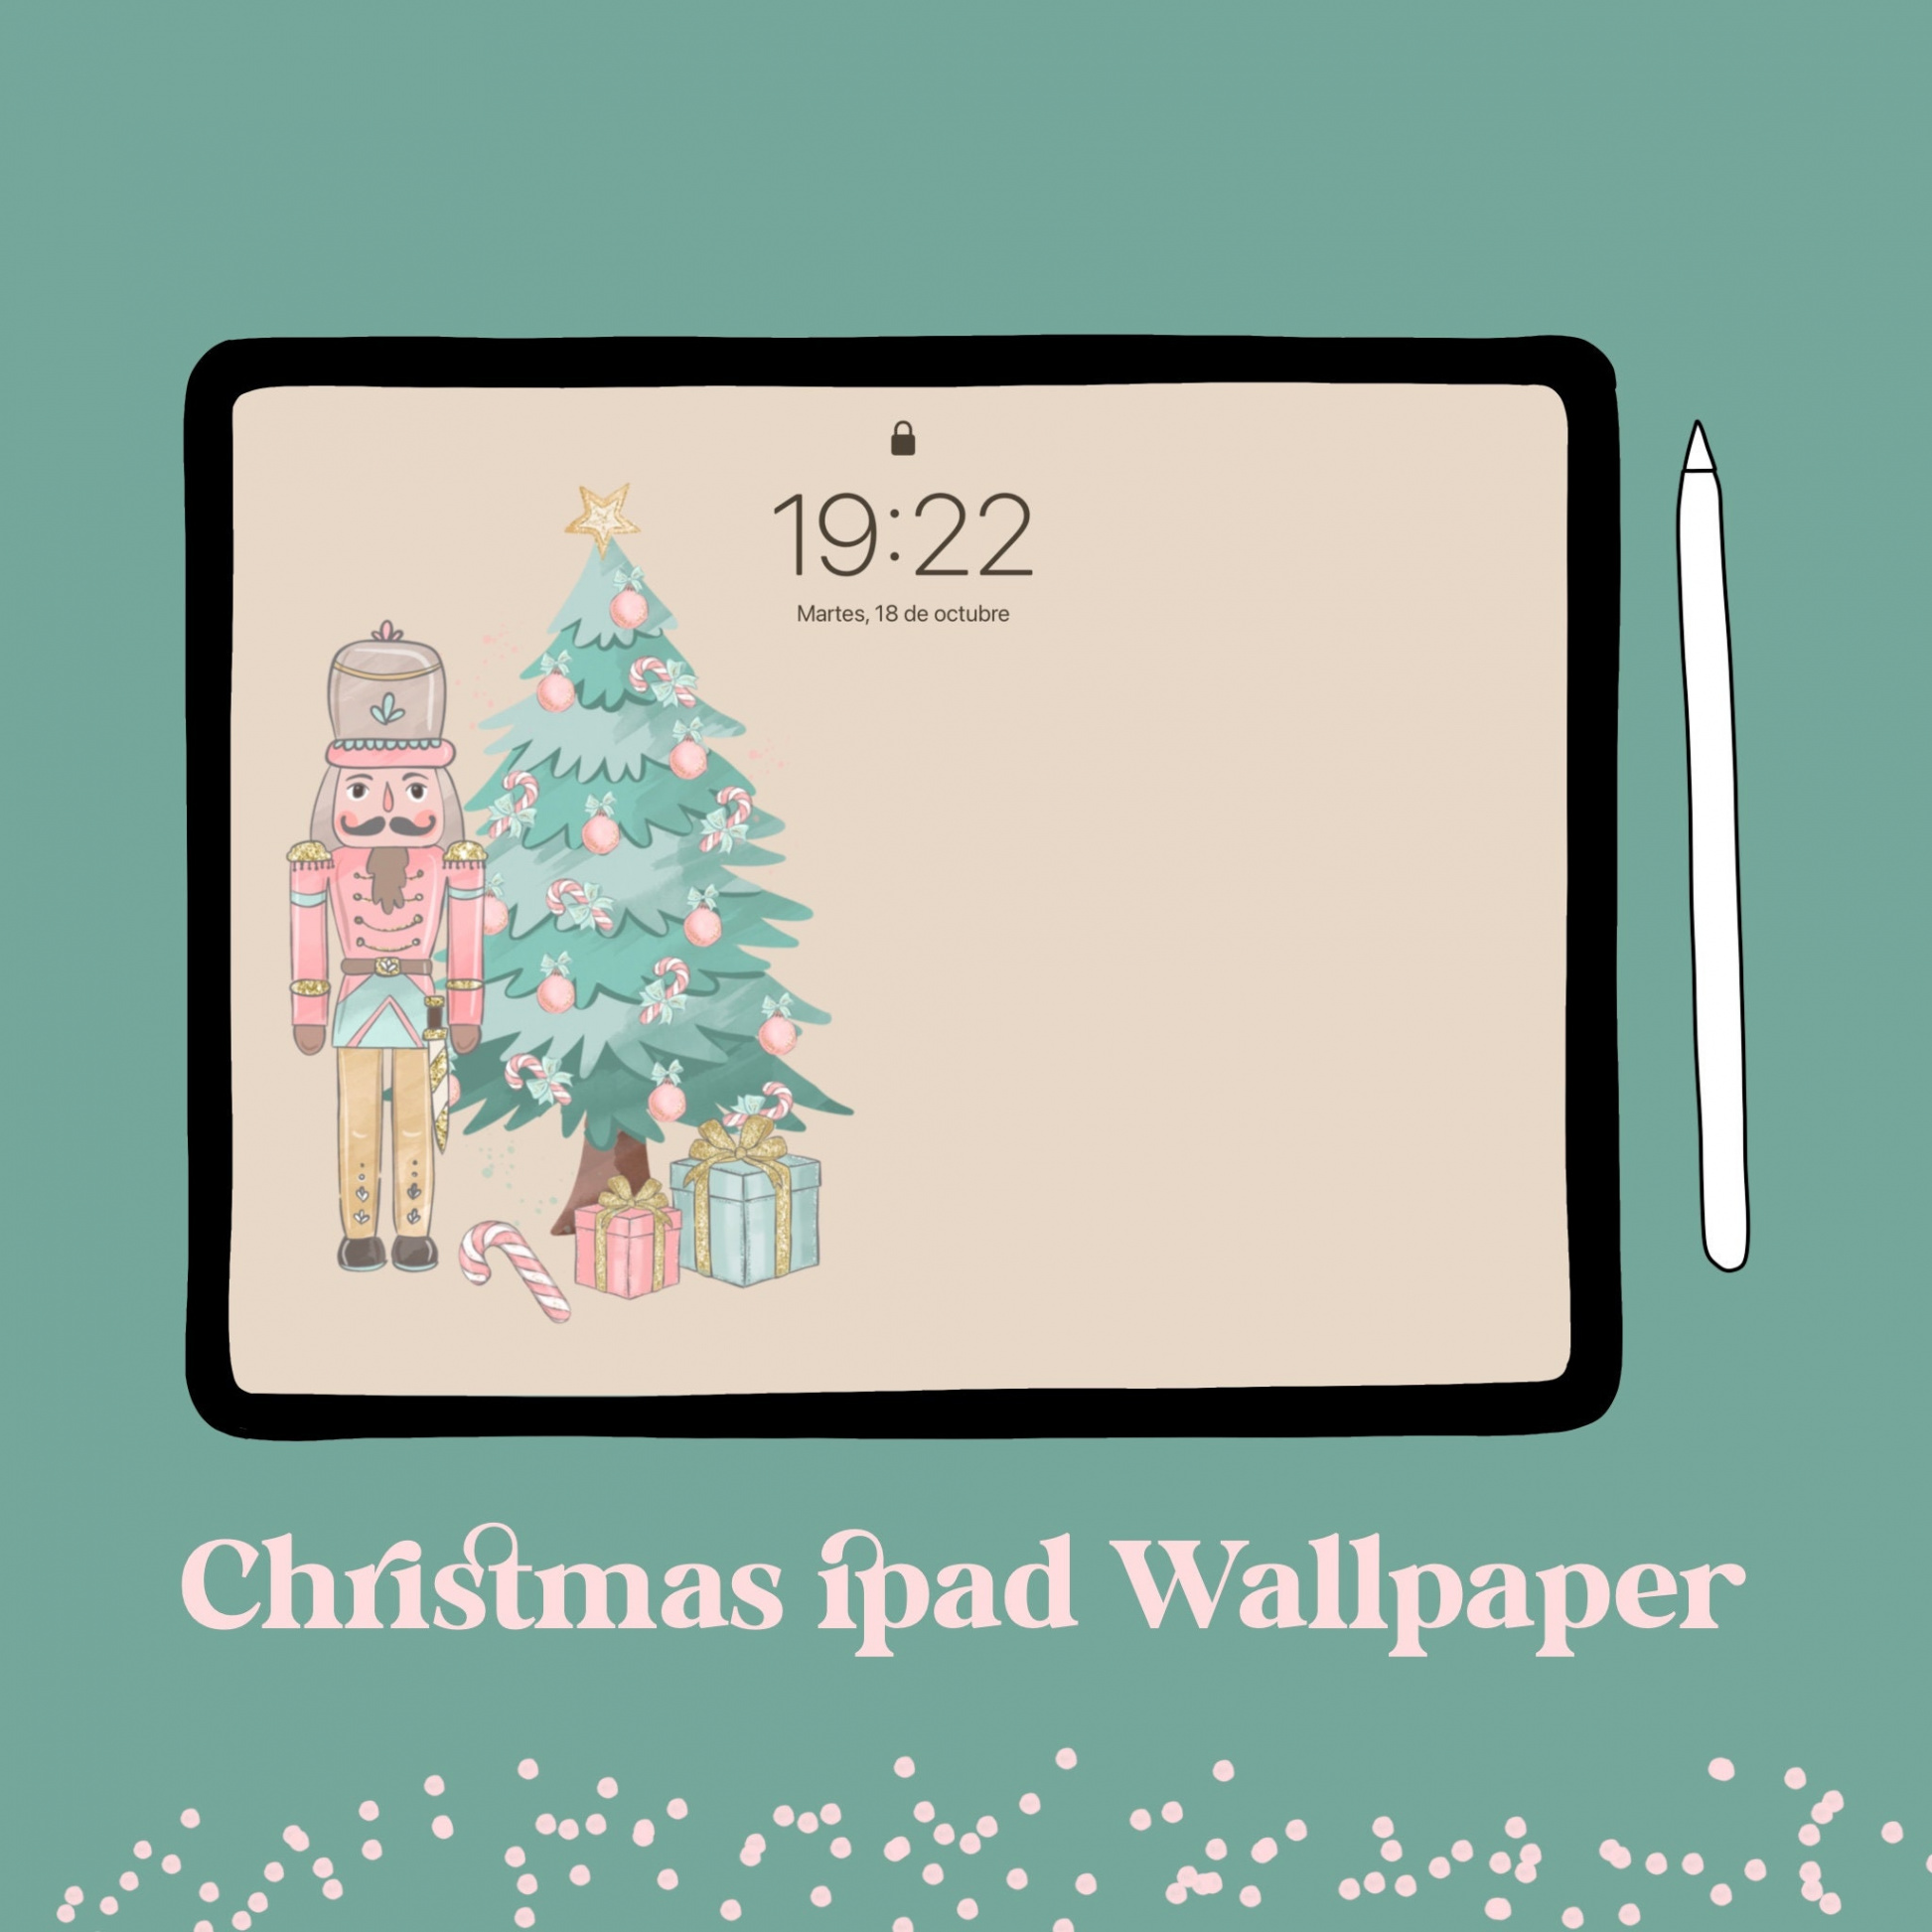 Christmas wallpapers for iPad - Etsy